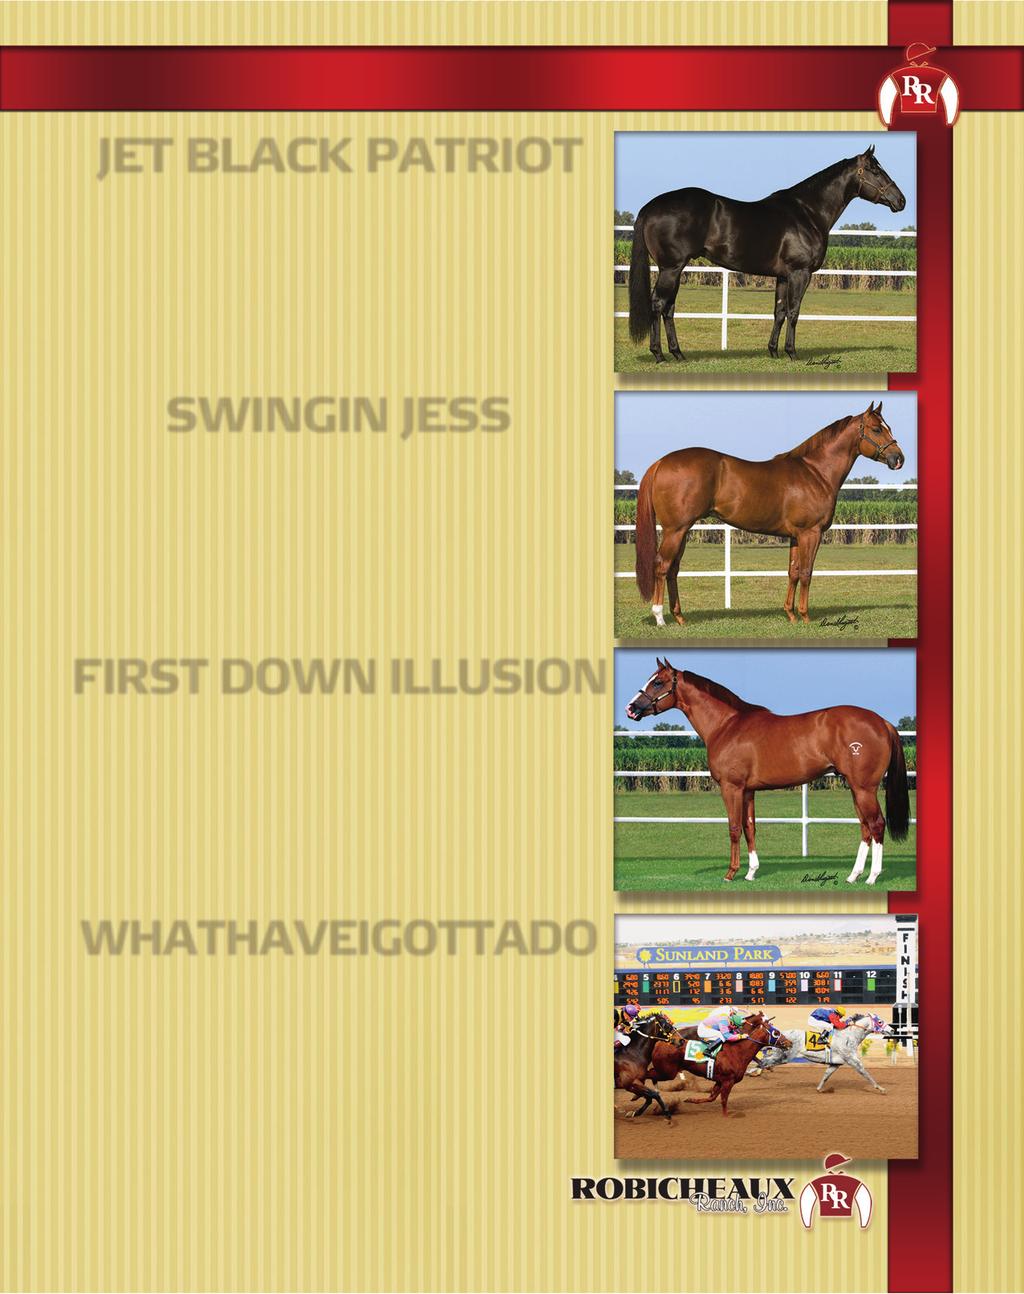 9 MILLION IN EARNERS Property of Robert Touchet 2013 FEE $6,000 SI-111 $533,181 Victory Dash x A Toast To Jet by Raise Your Glass TB 2-TIME CHAMPION SIRE OF $18.